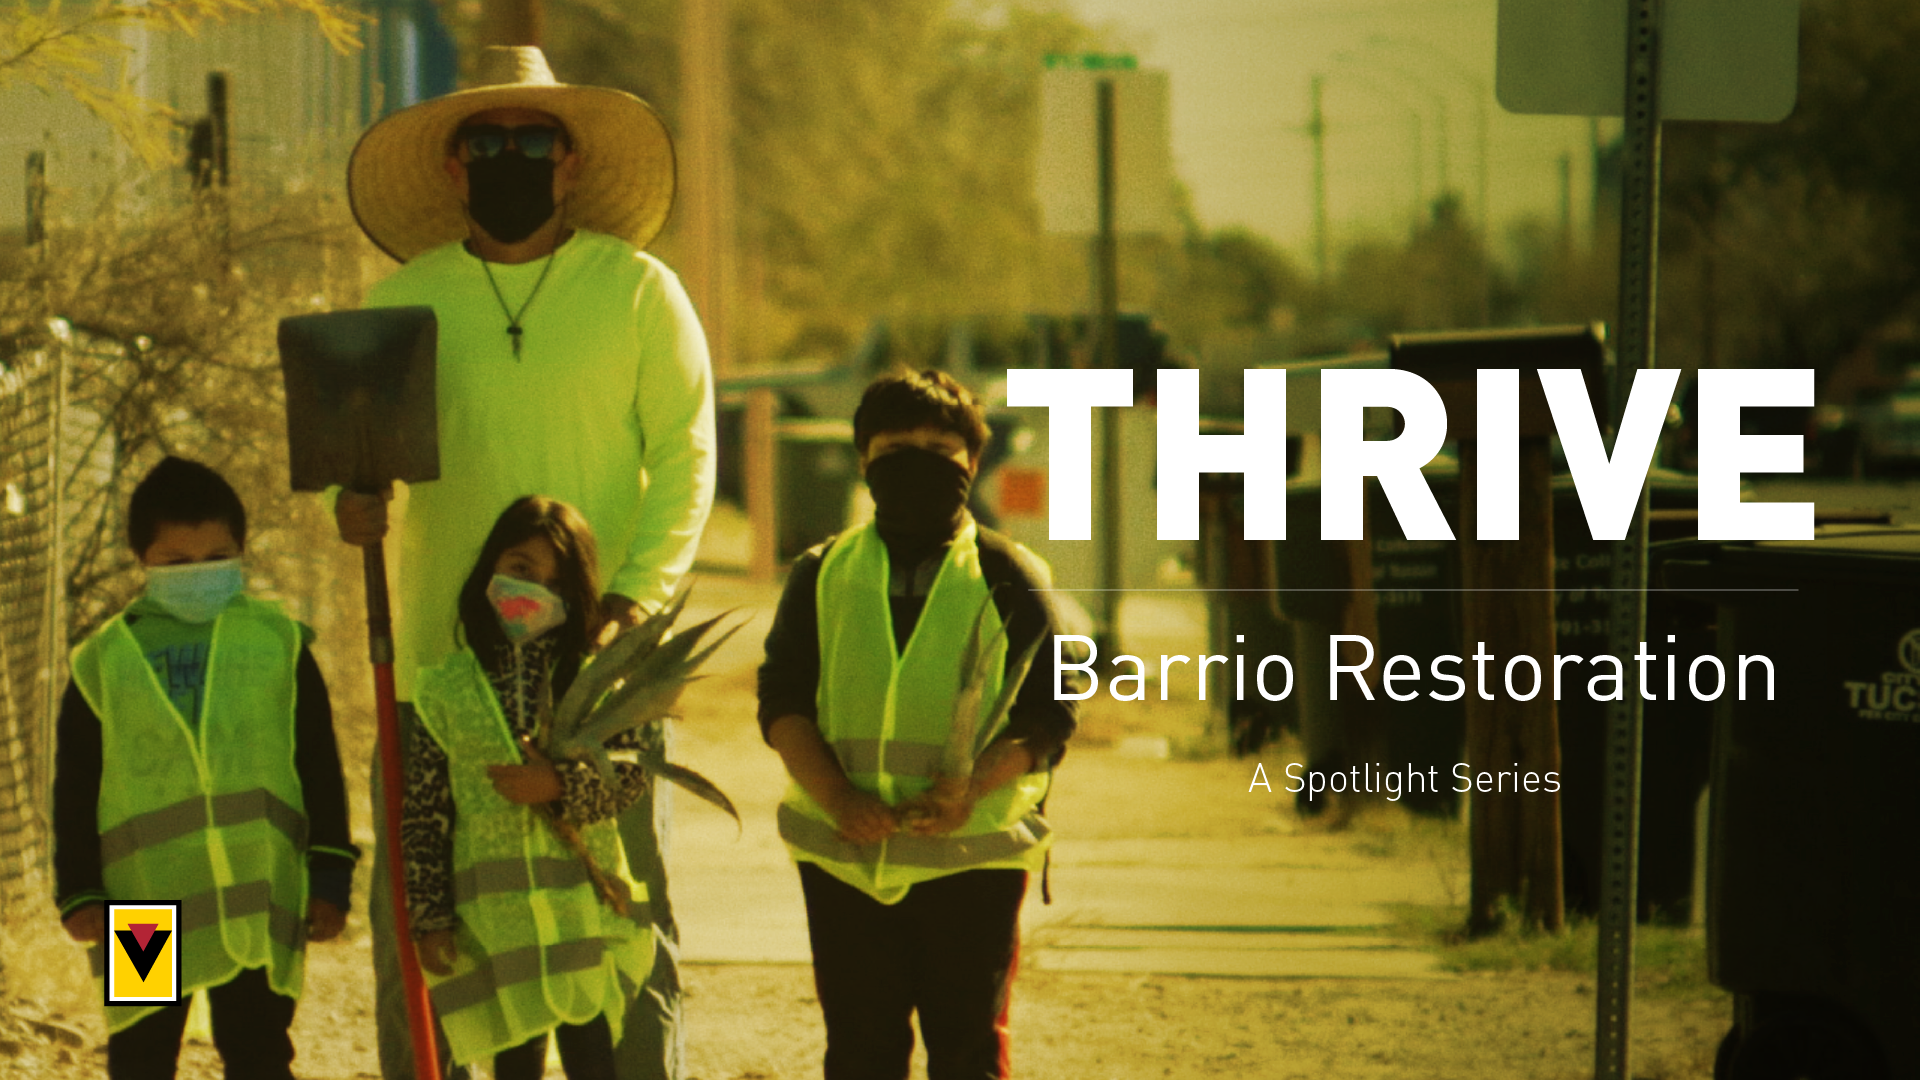 Taking Pride In Our Community: The Barrio Restoration Story